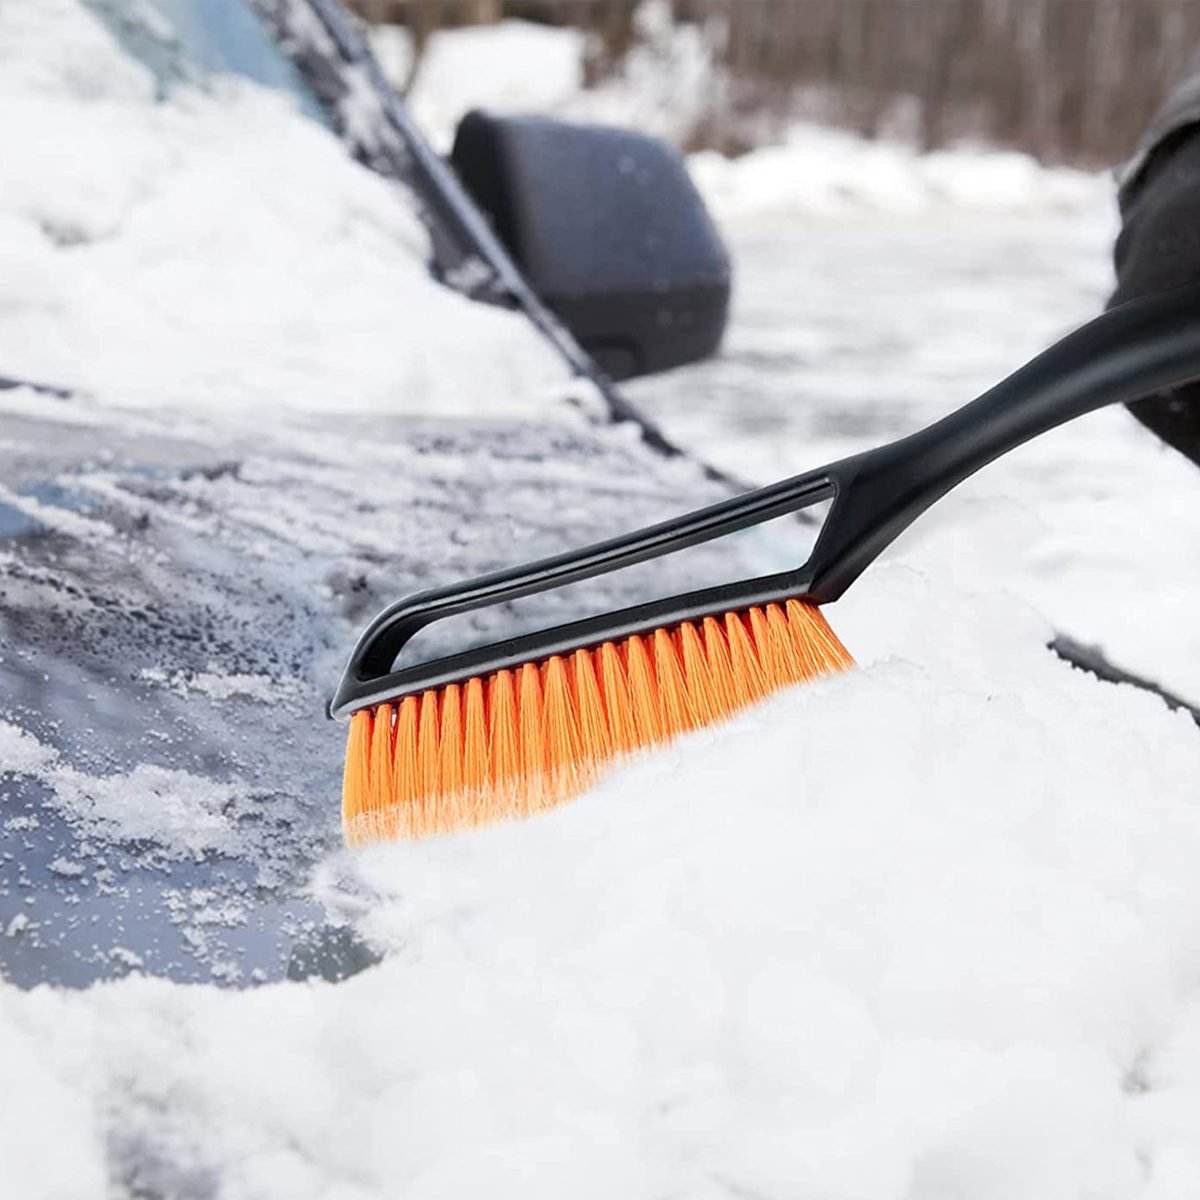 HEAVY DUTY ICE SCRAPER With Soft Grip For Car & Van Windscreen Snow Remover